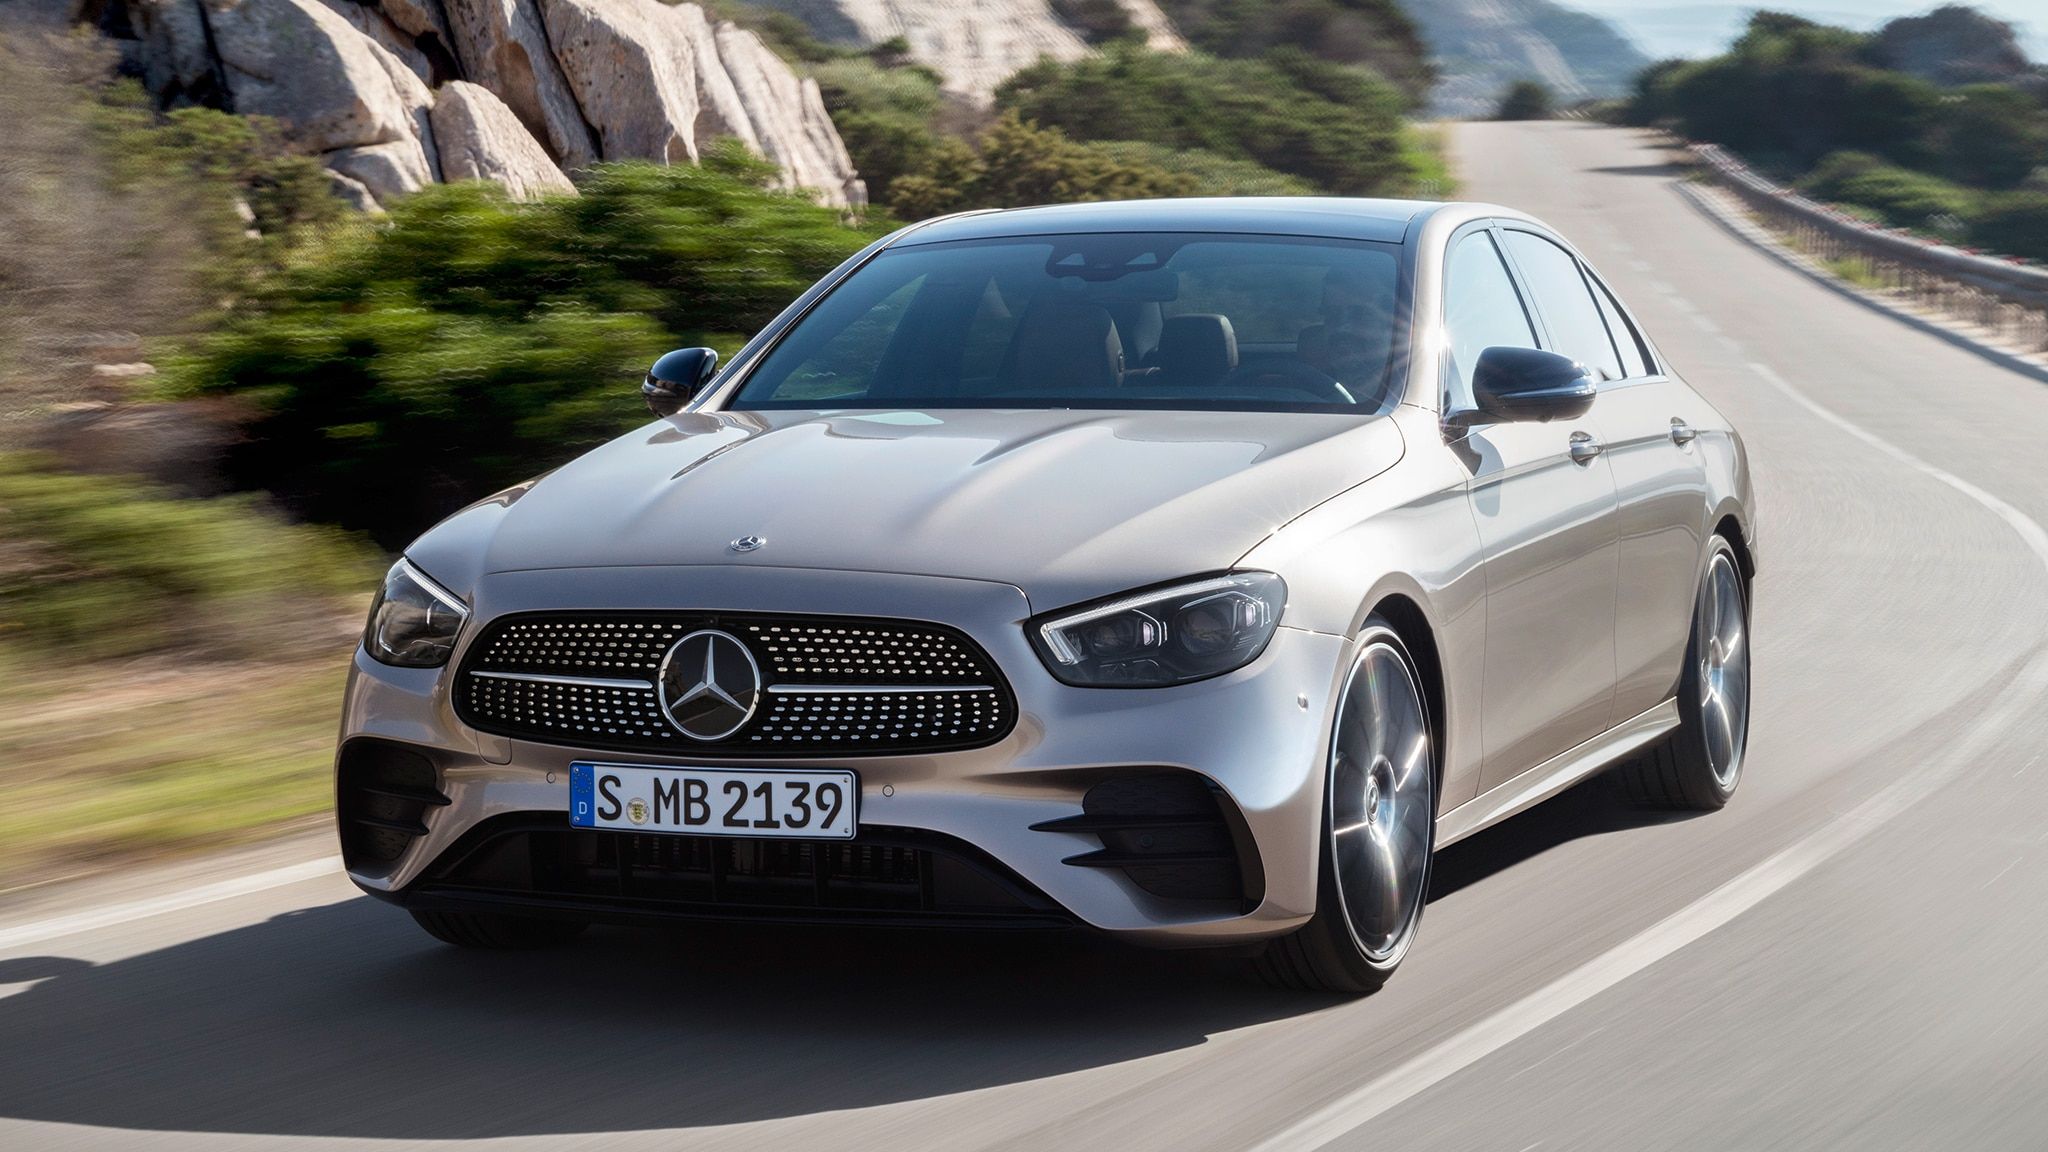 Mercedes Benz E Class First Look: Refreshed Up Front, Out Back, And Inside